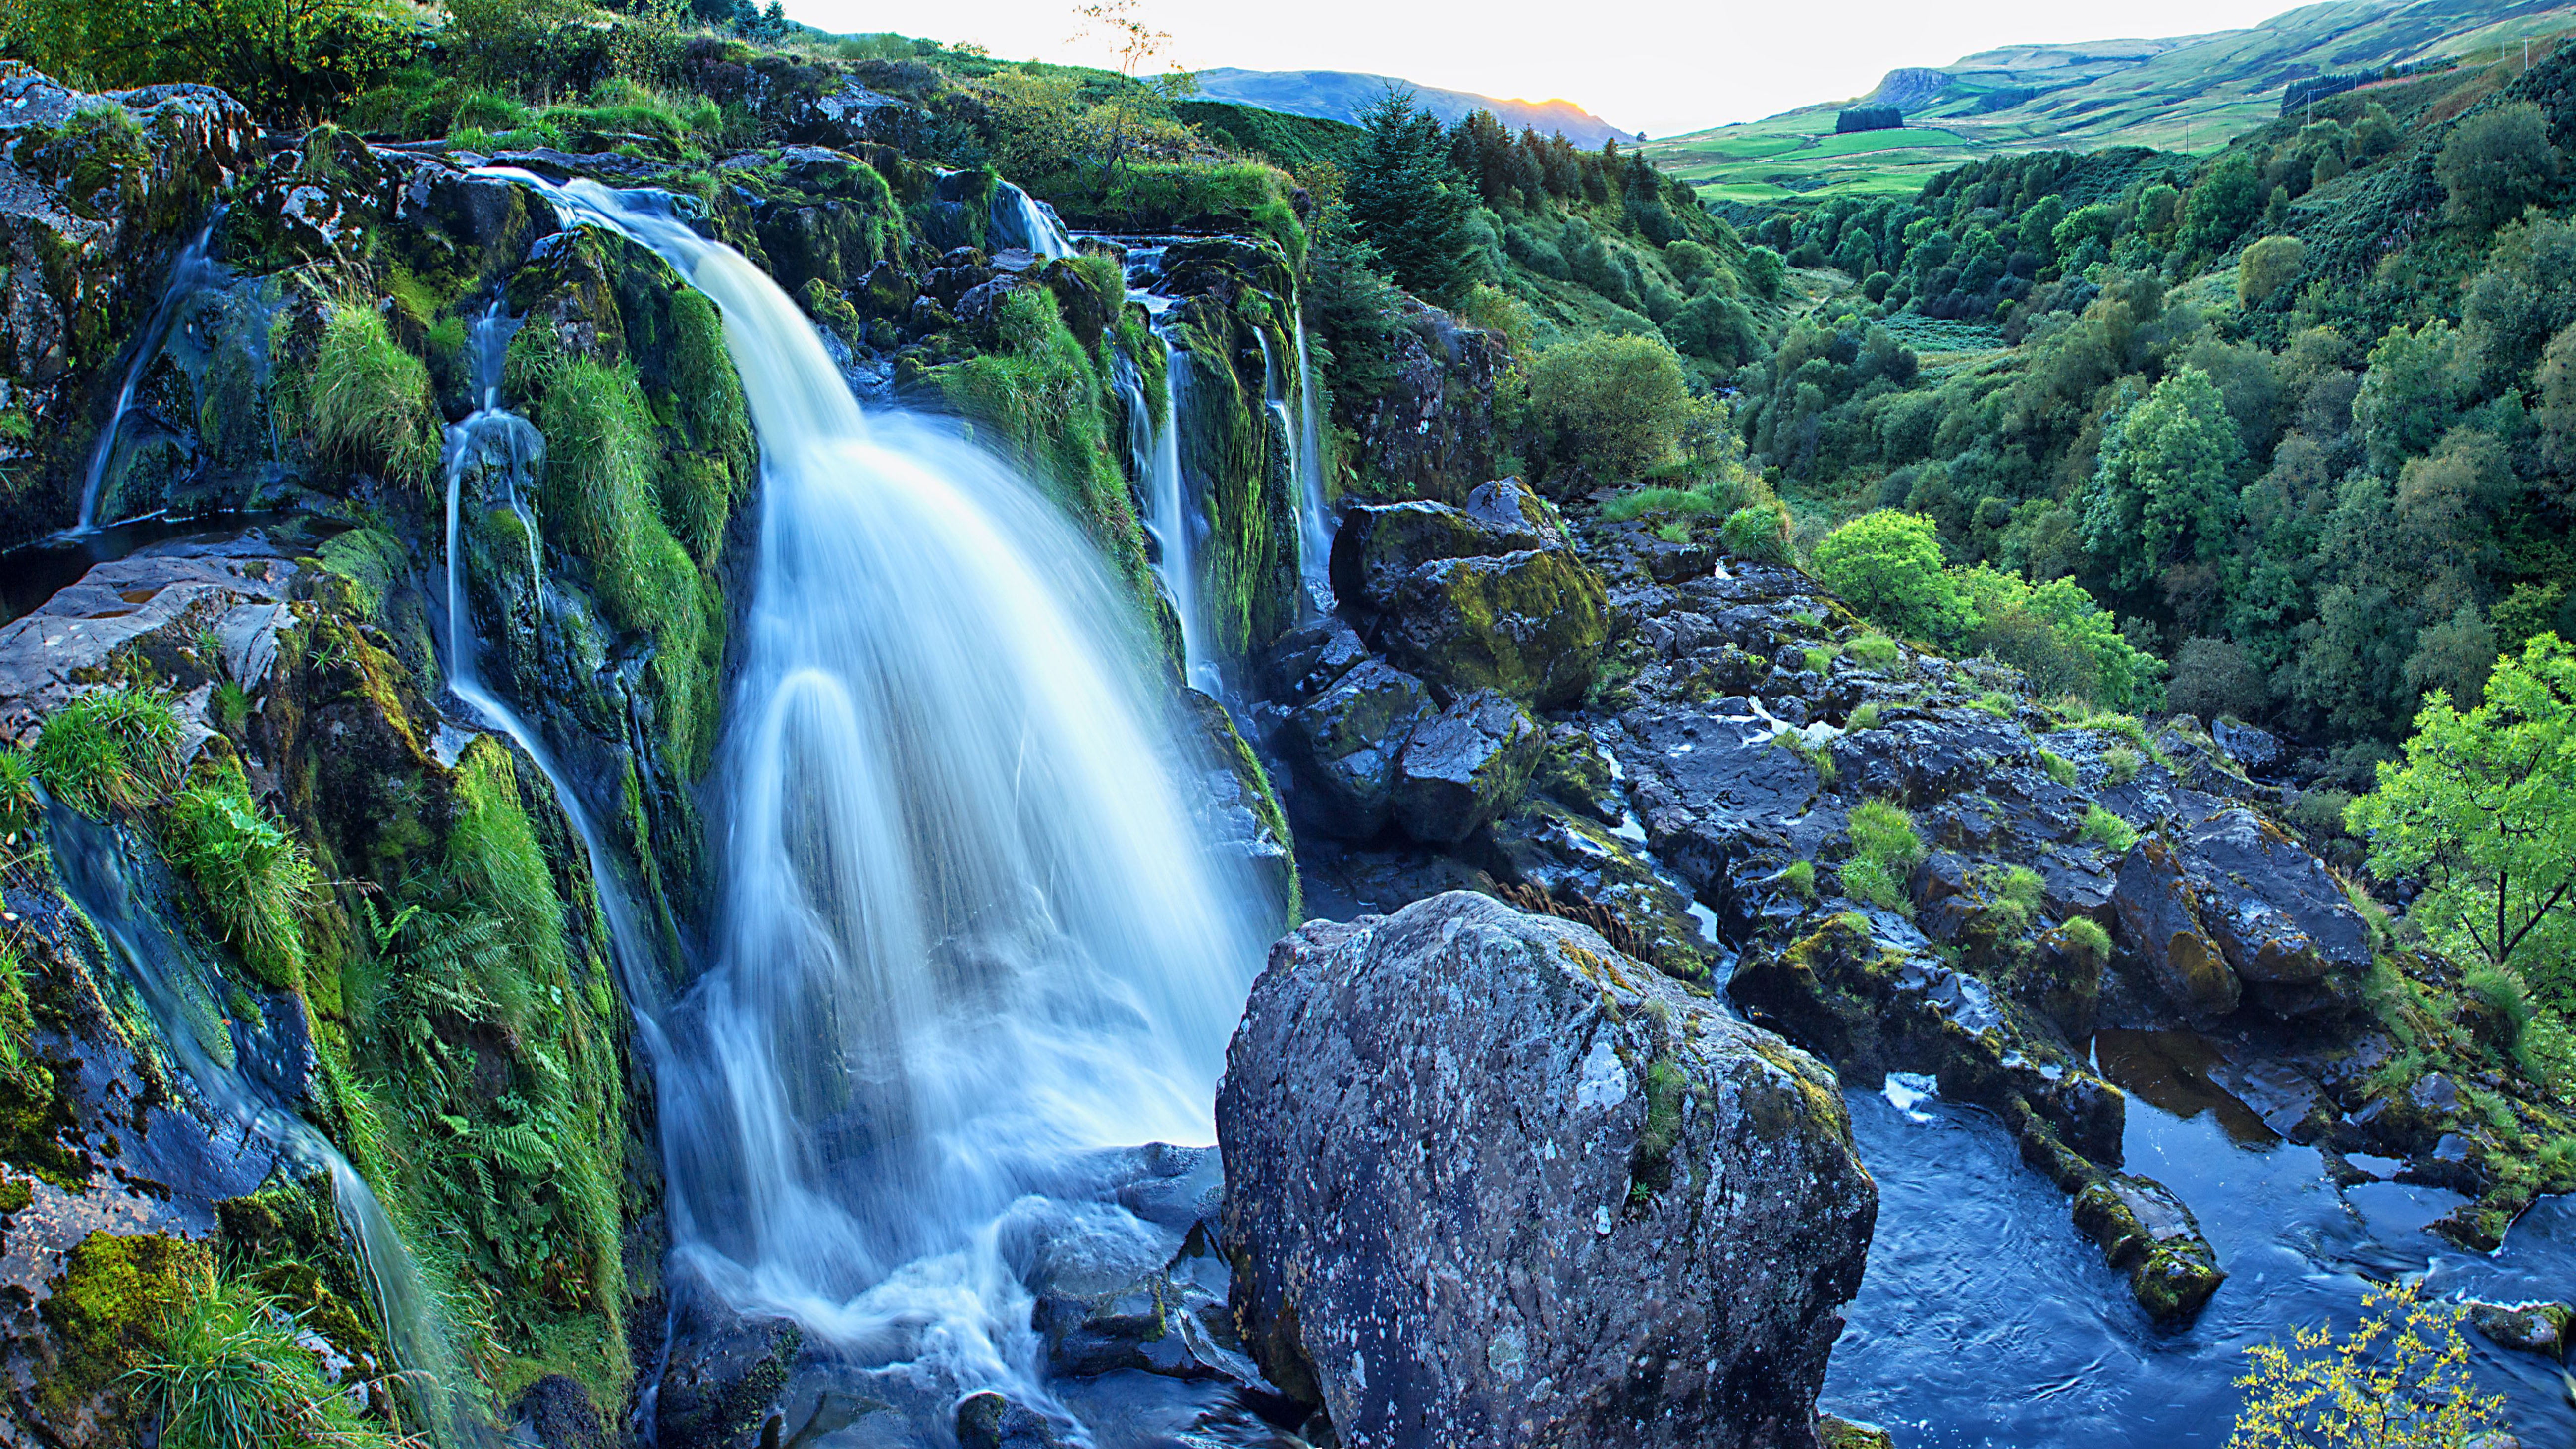 Loup Of Fintry Is A Waterfall On The River Endrick East Of Fintry In Scotland Desktop Wallpaper Hd 3840×2400